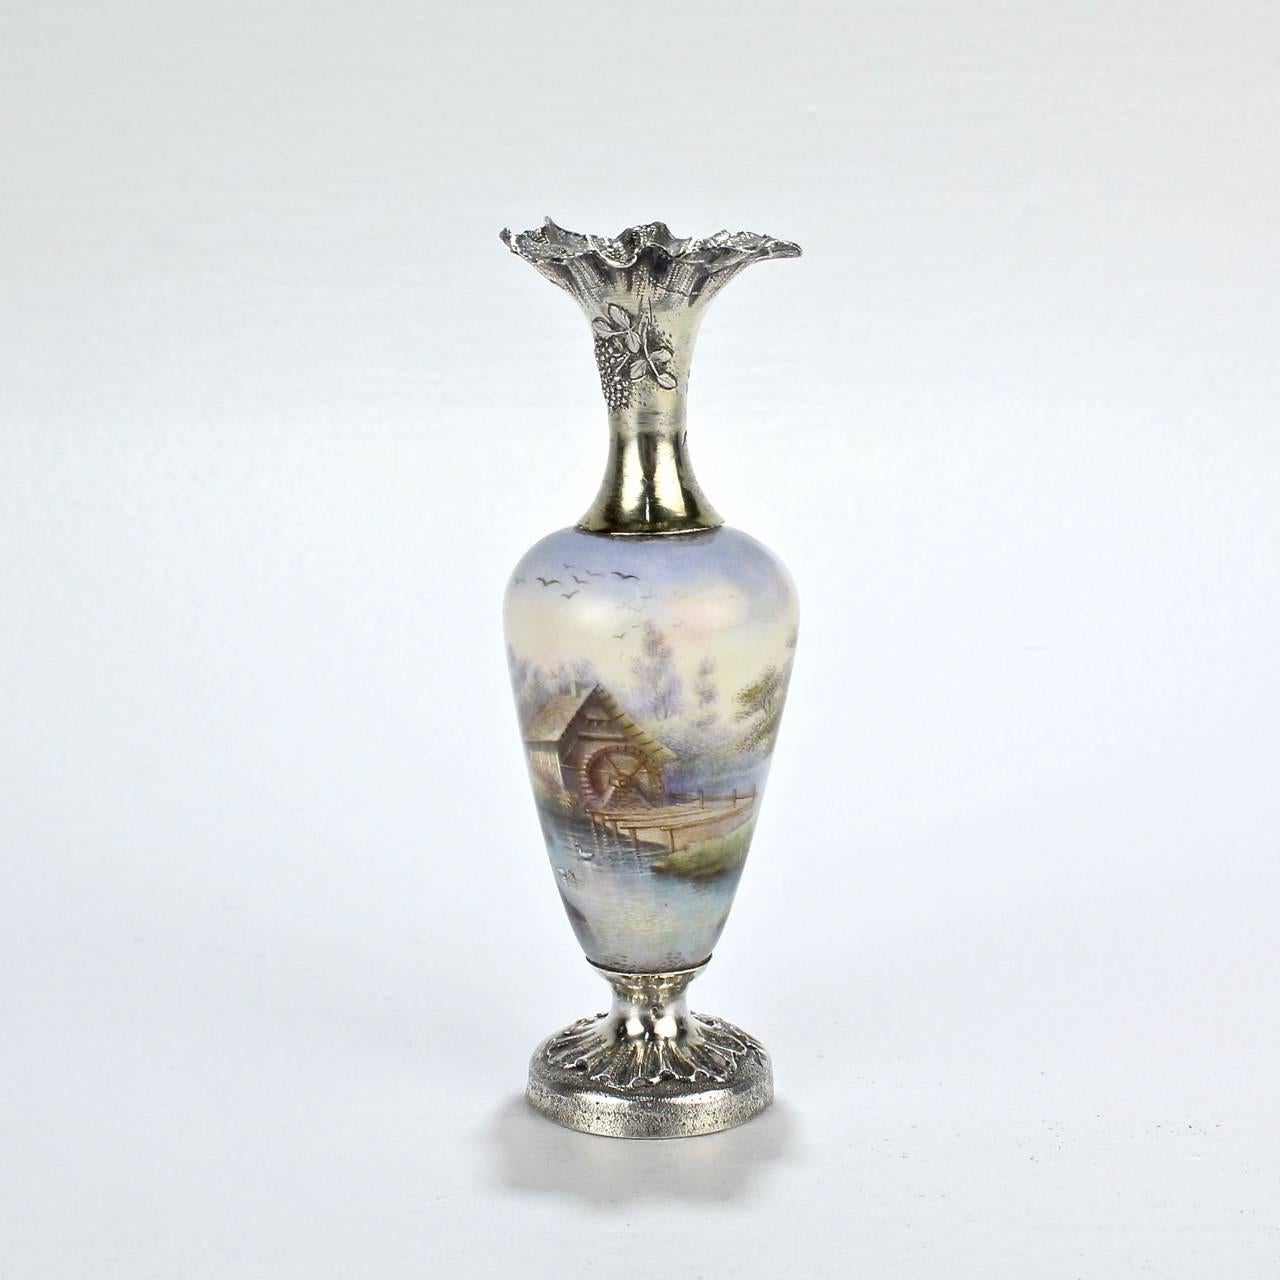 Antique French Enamel and Sterling Silver Miniature Cabinet Vase In Good Condition For Sale In Philadelphia, PA